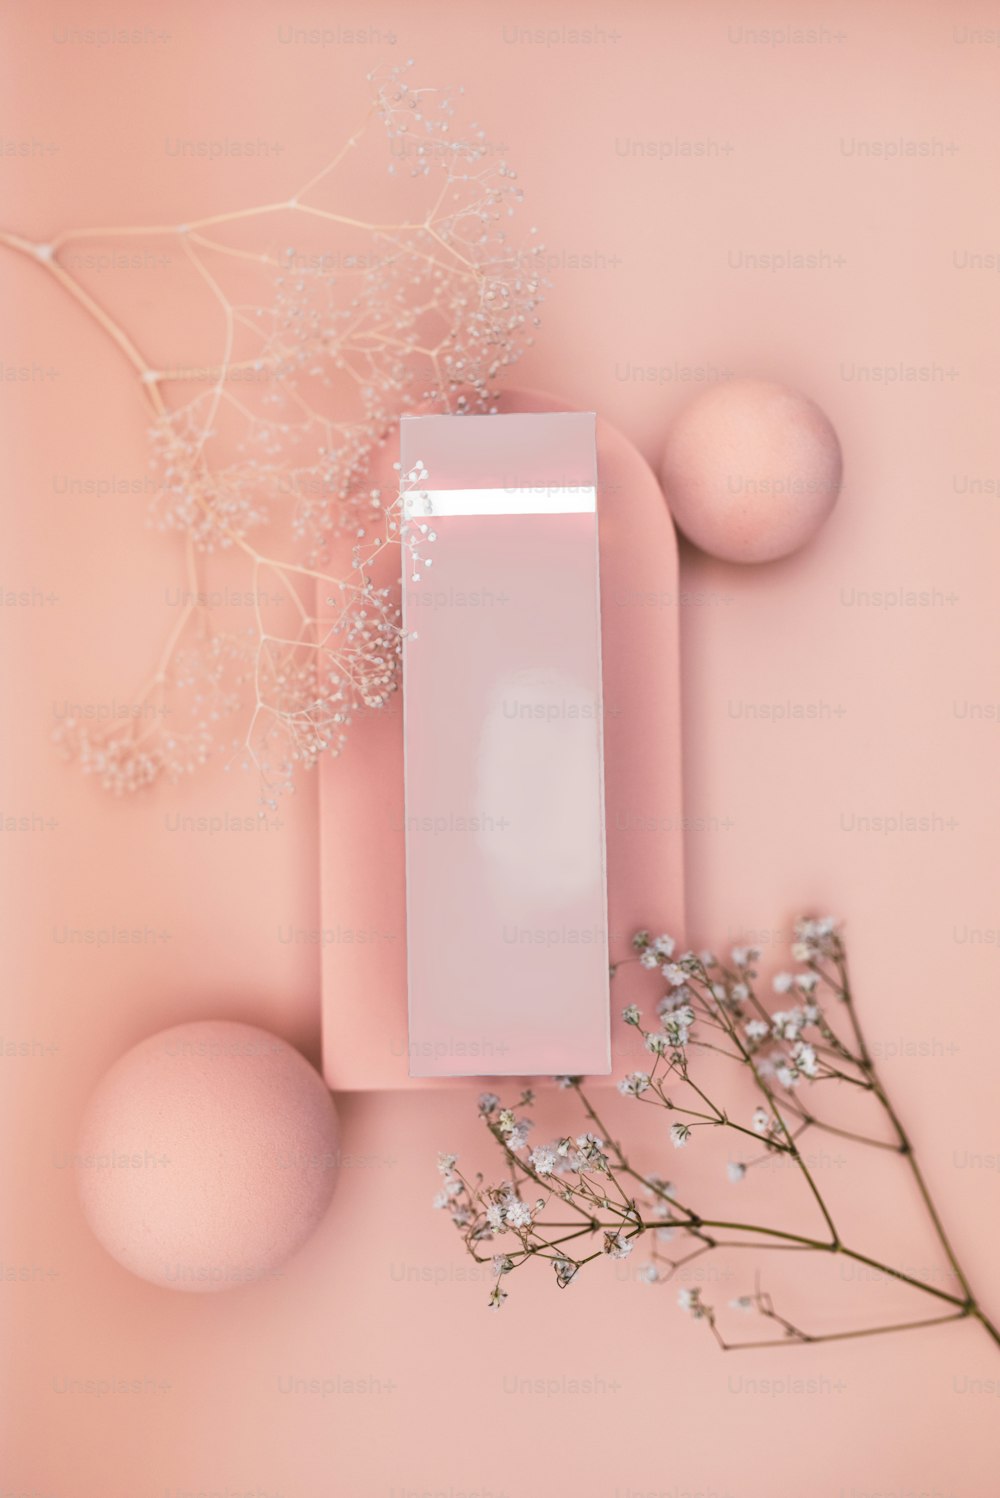 a pink box and some flowers on a pink surface